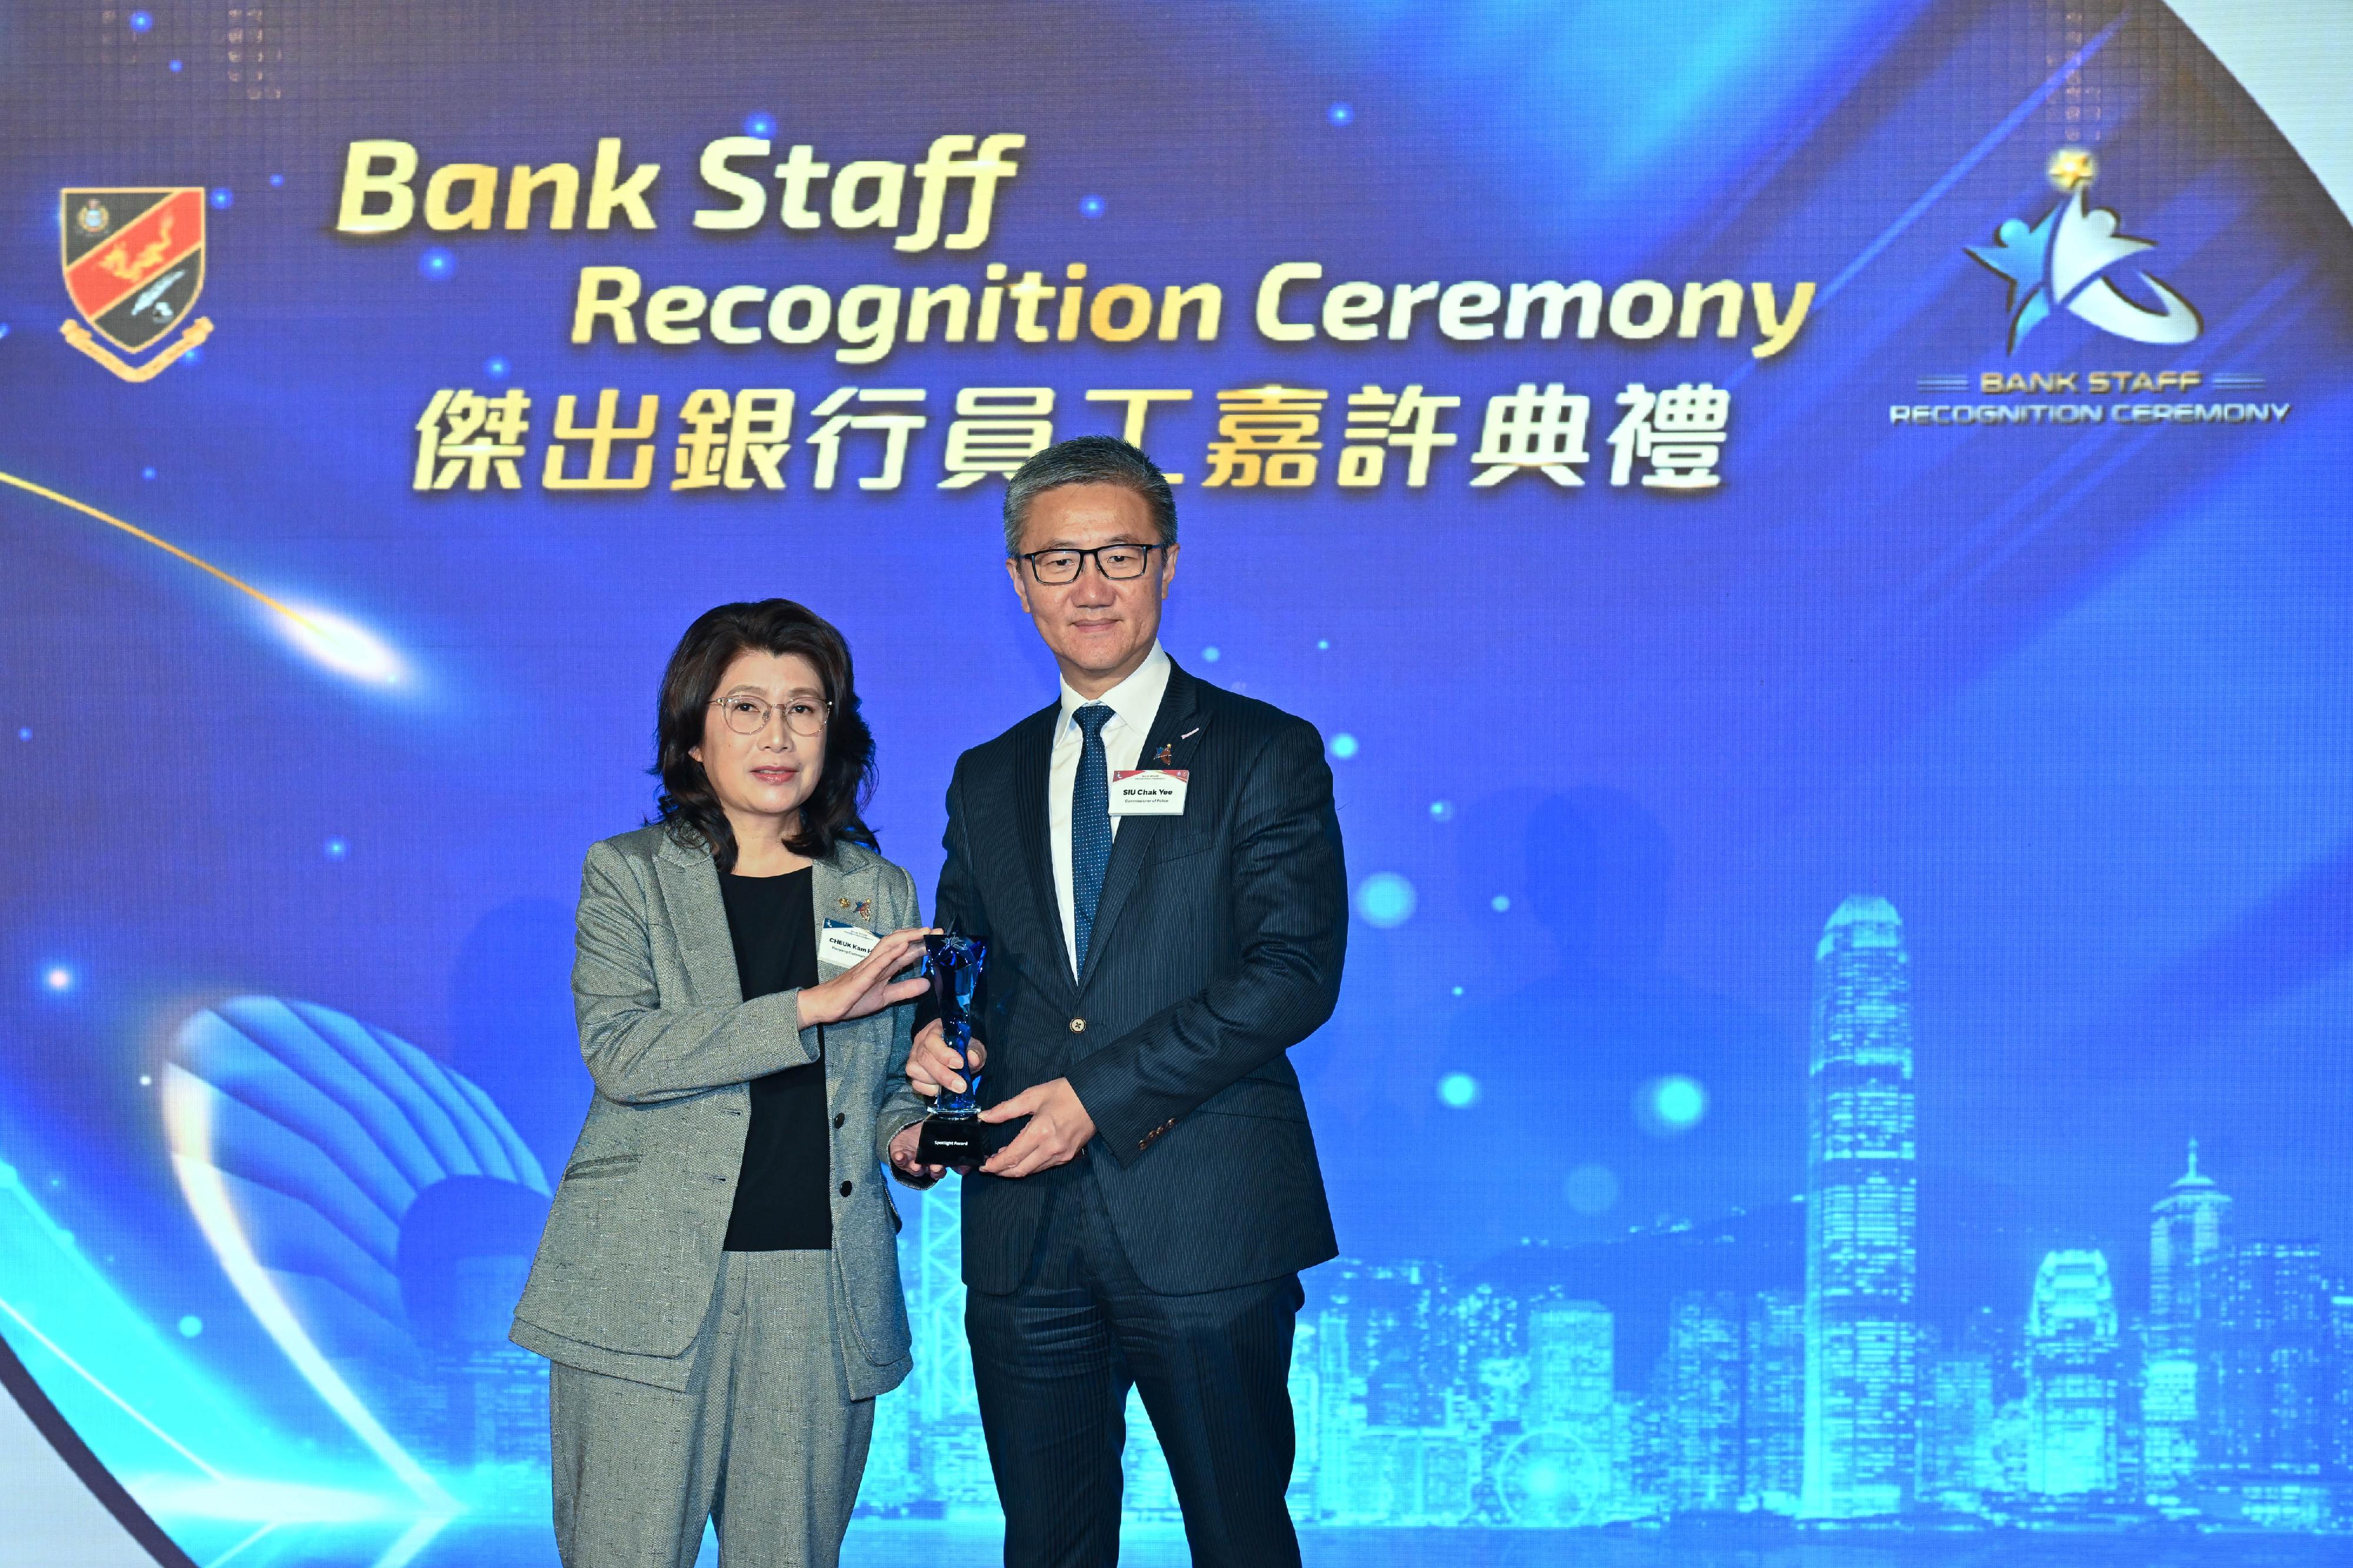 The Bank Staff Recognition Ceremony organised by the Hong Kong Police Force was held today (March 22). Photo shows the Commissioner of Police, Mr Siu Chak-yee (right), presenting the Spotlight Award to the bank representative.